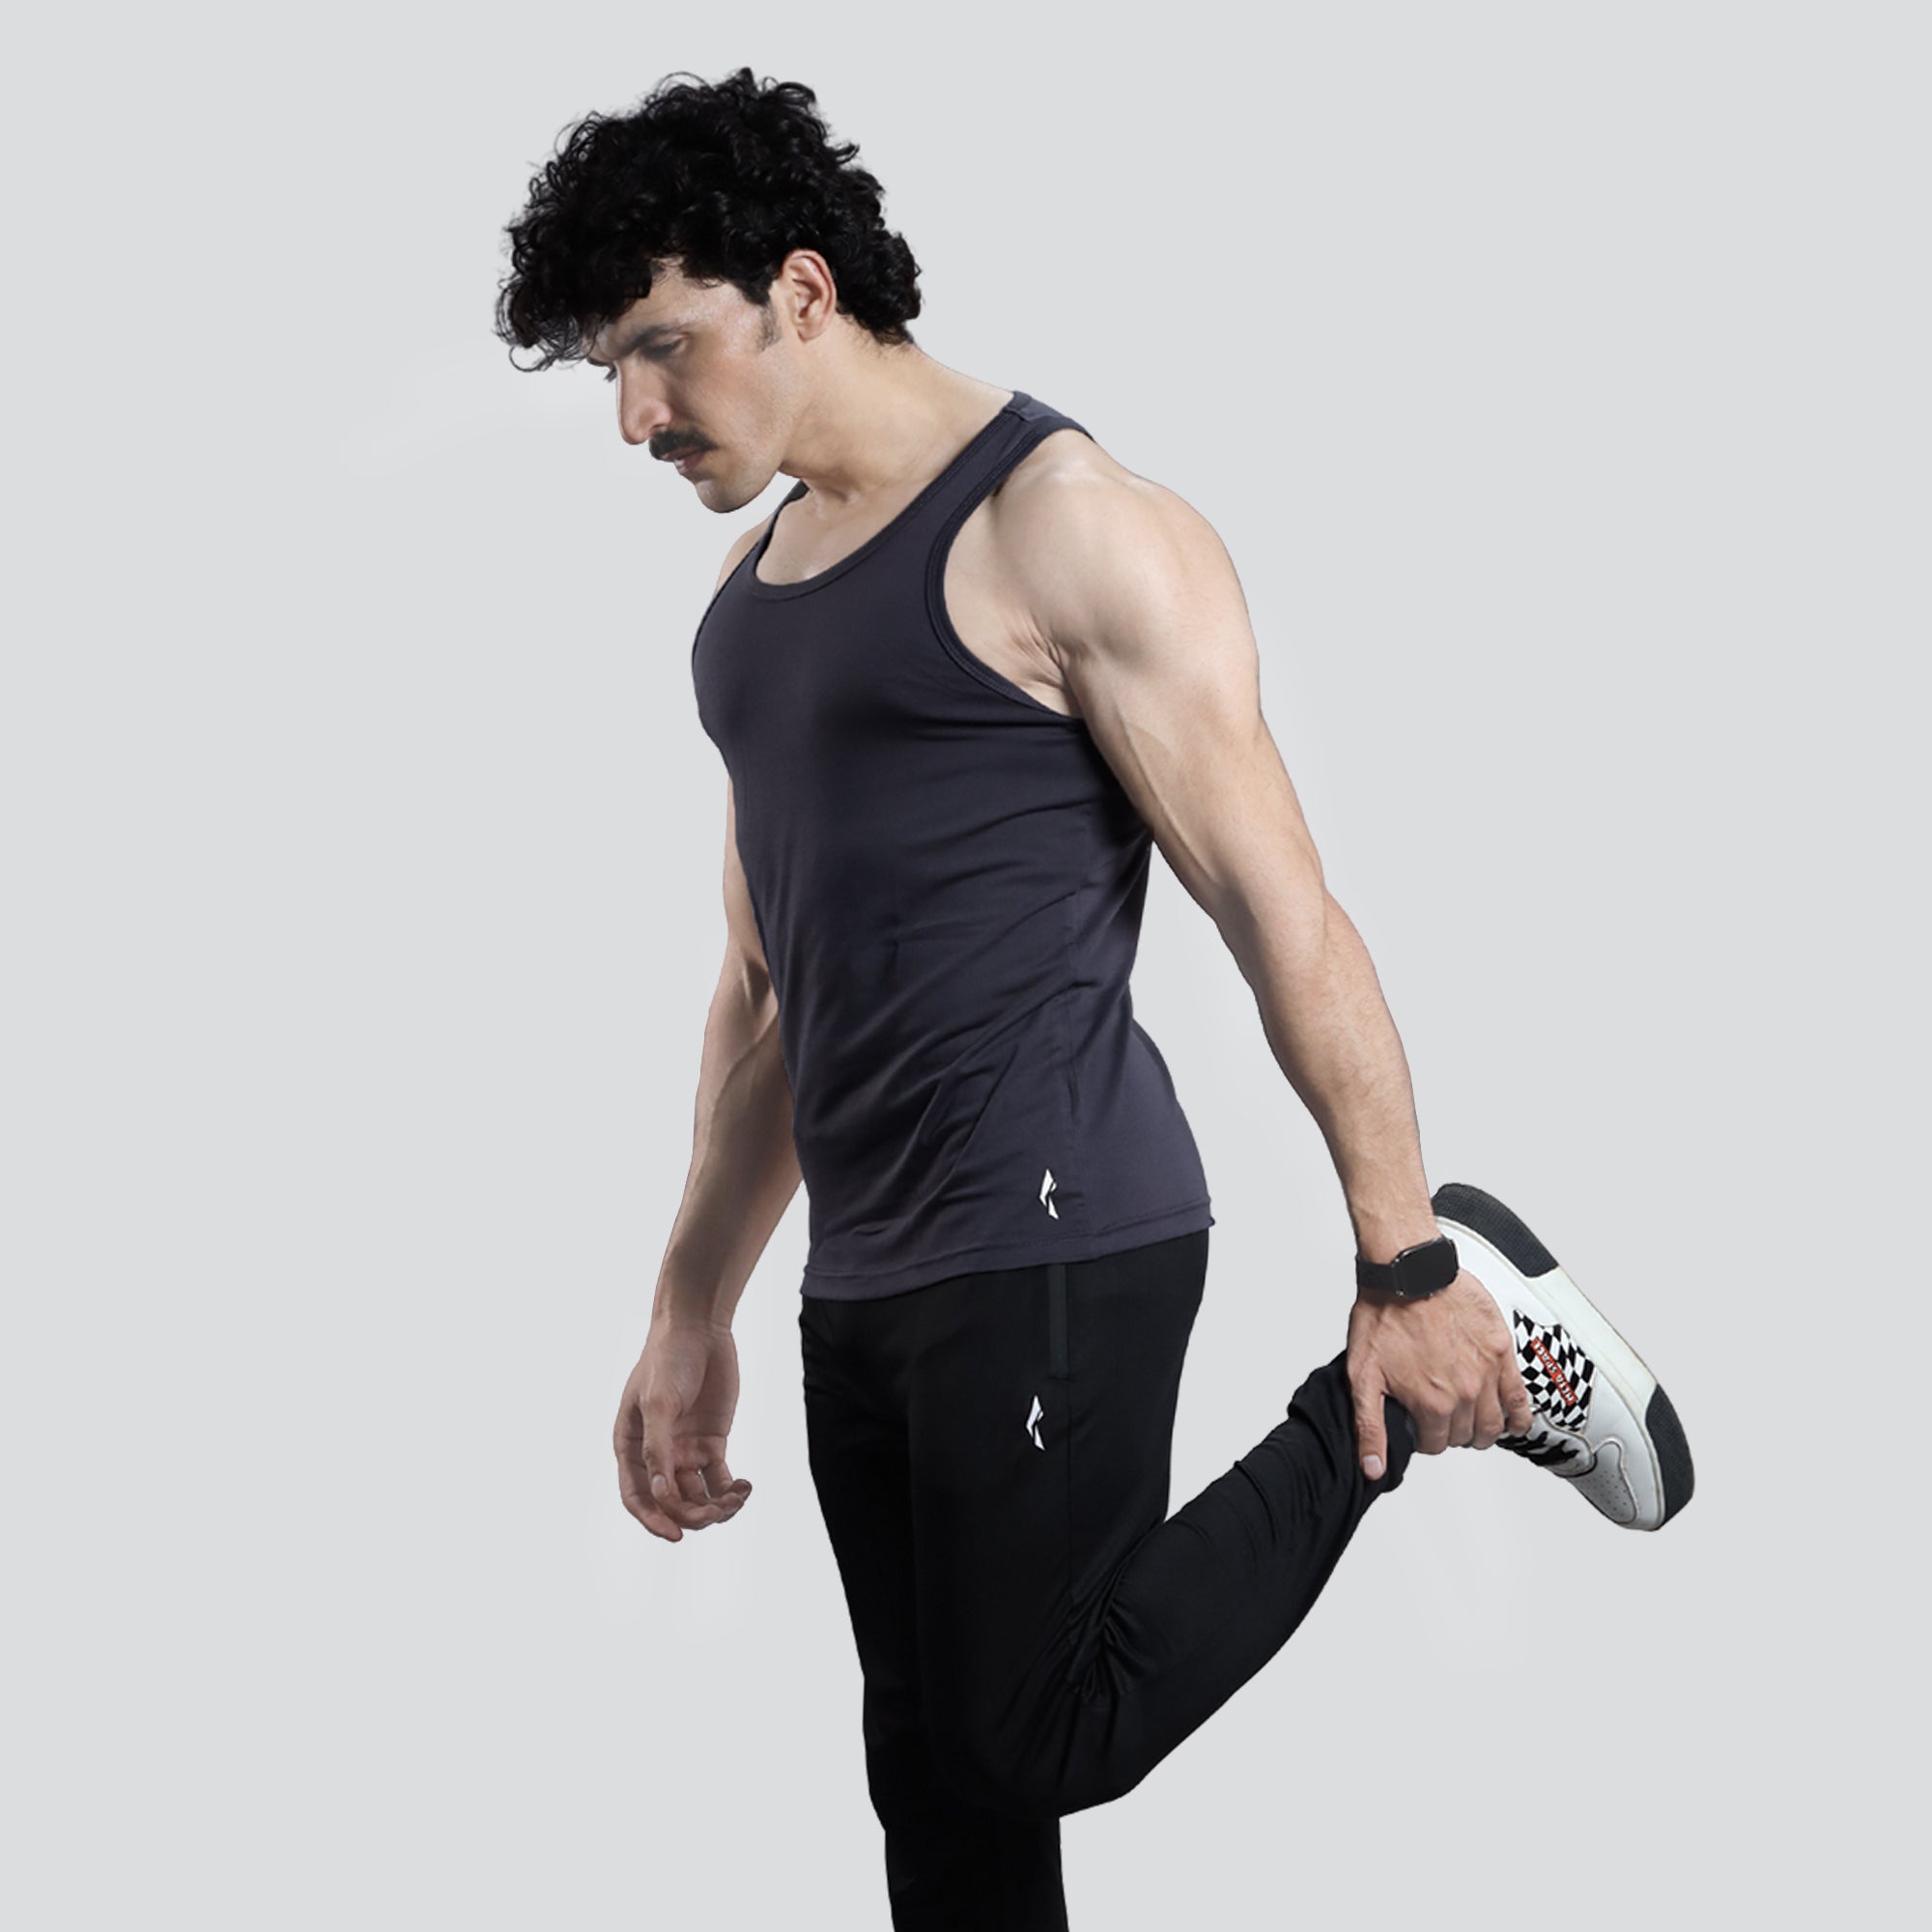 Men's Athleisure Tank Tops Sleeveless T-Shirts For Workout